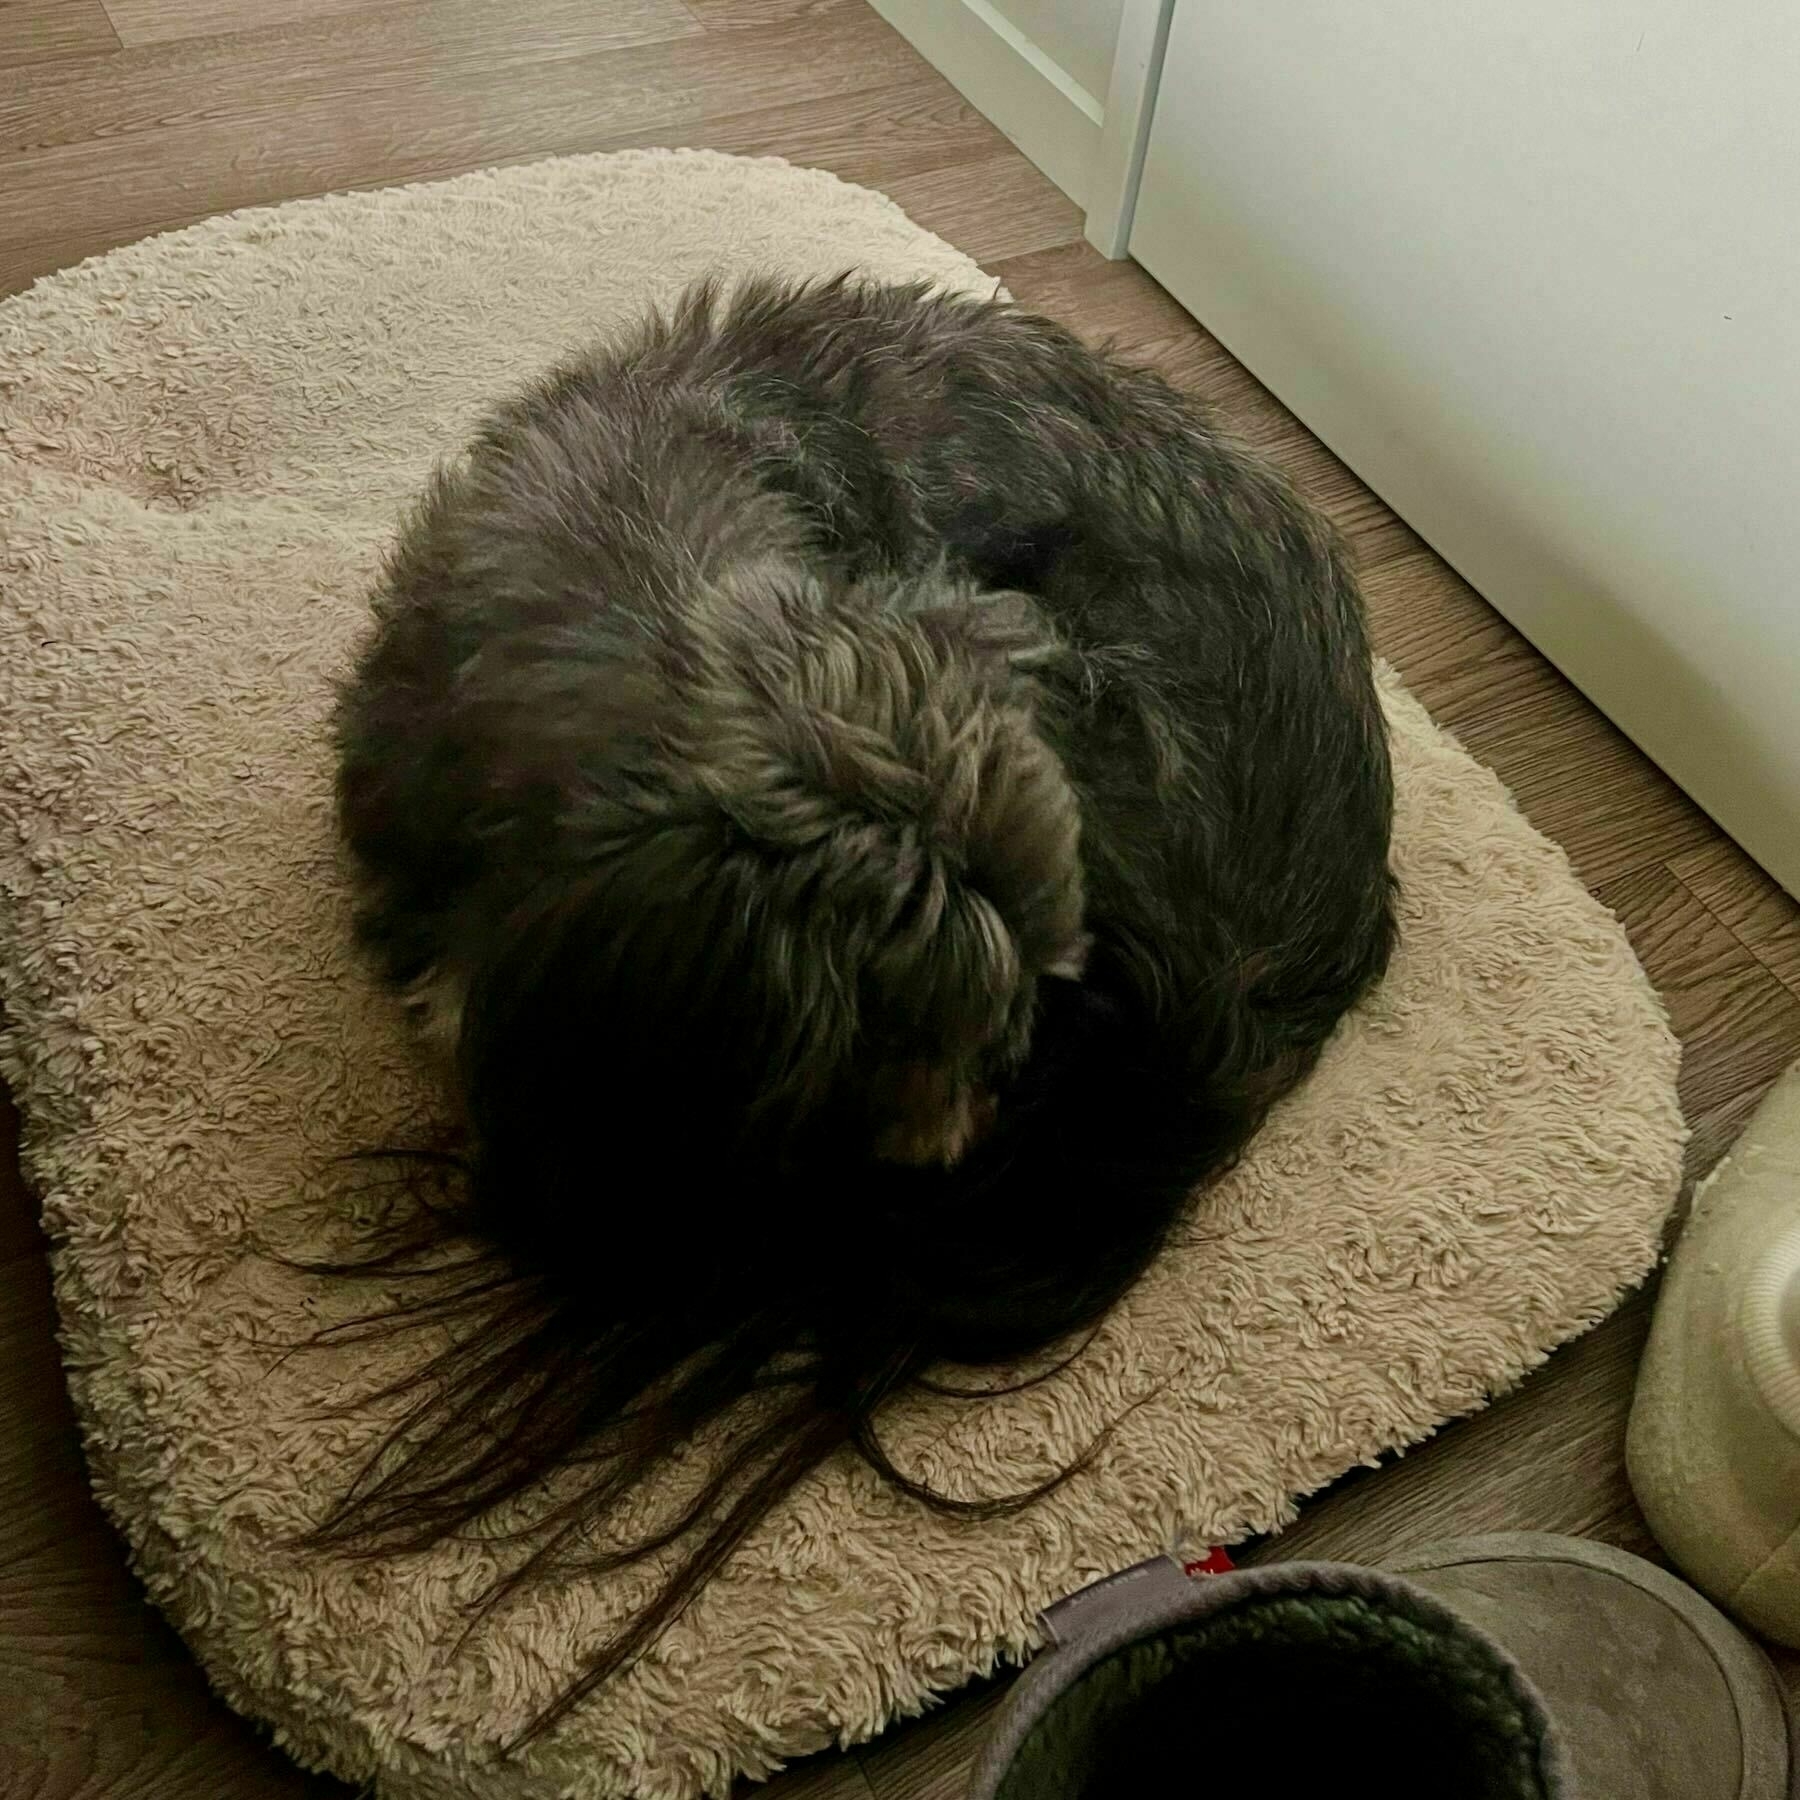 Hairy dog curled up on rug. 